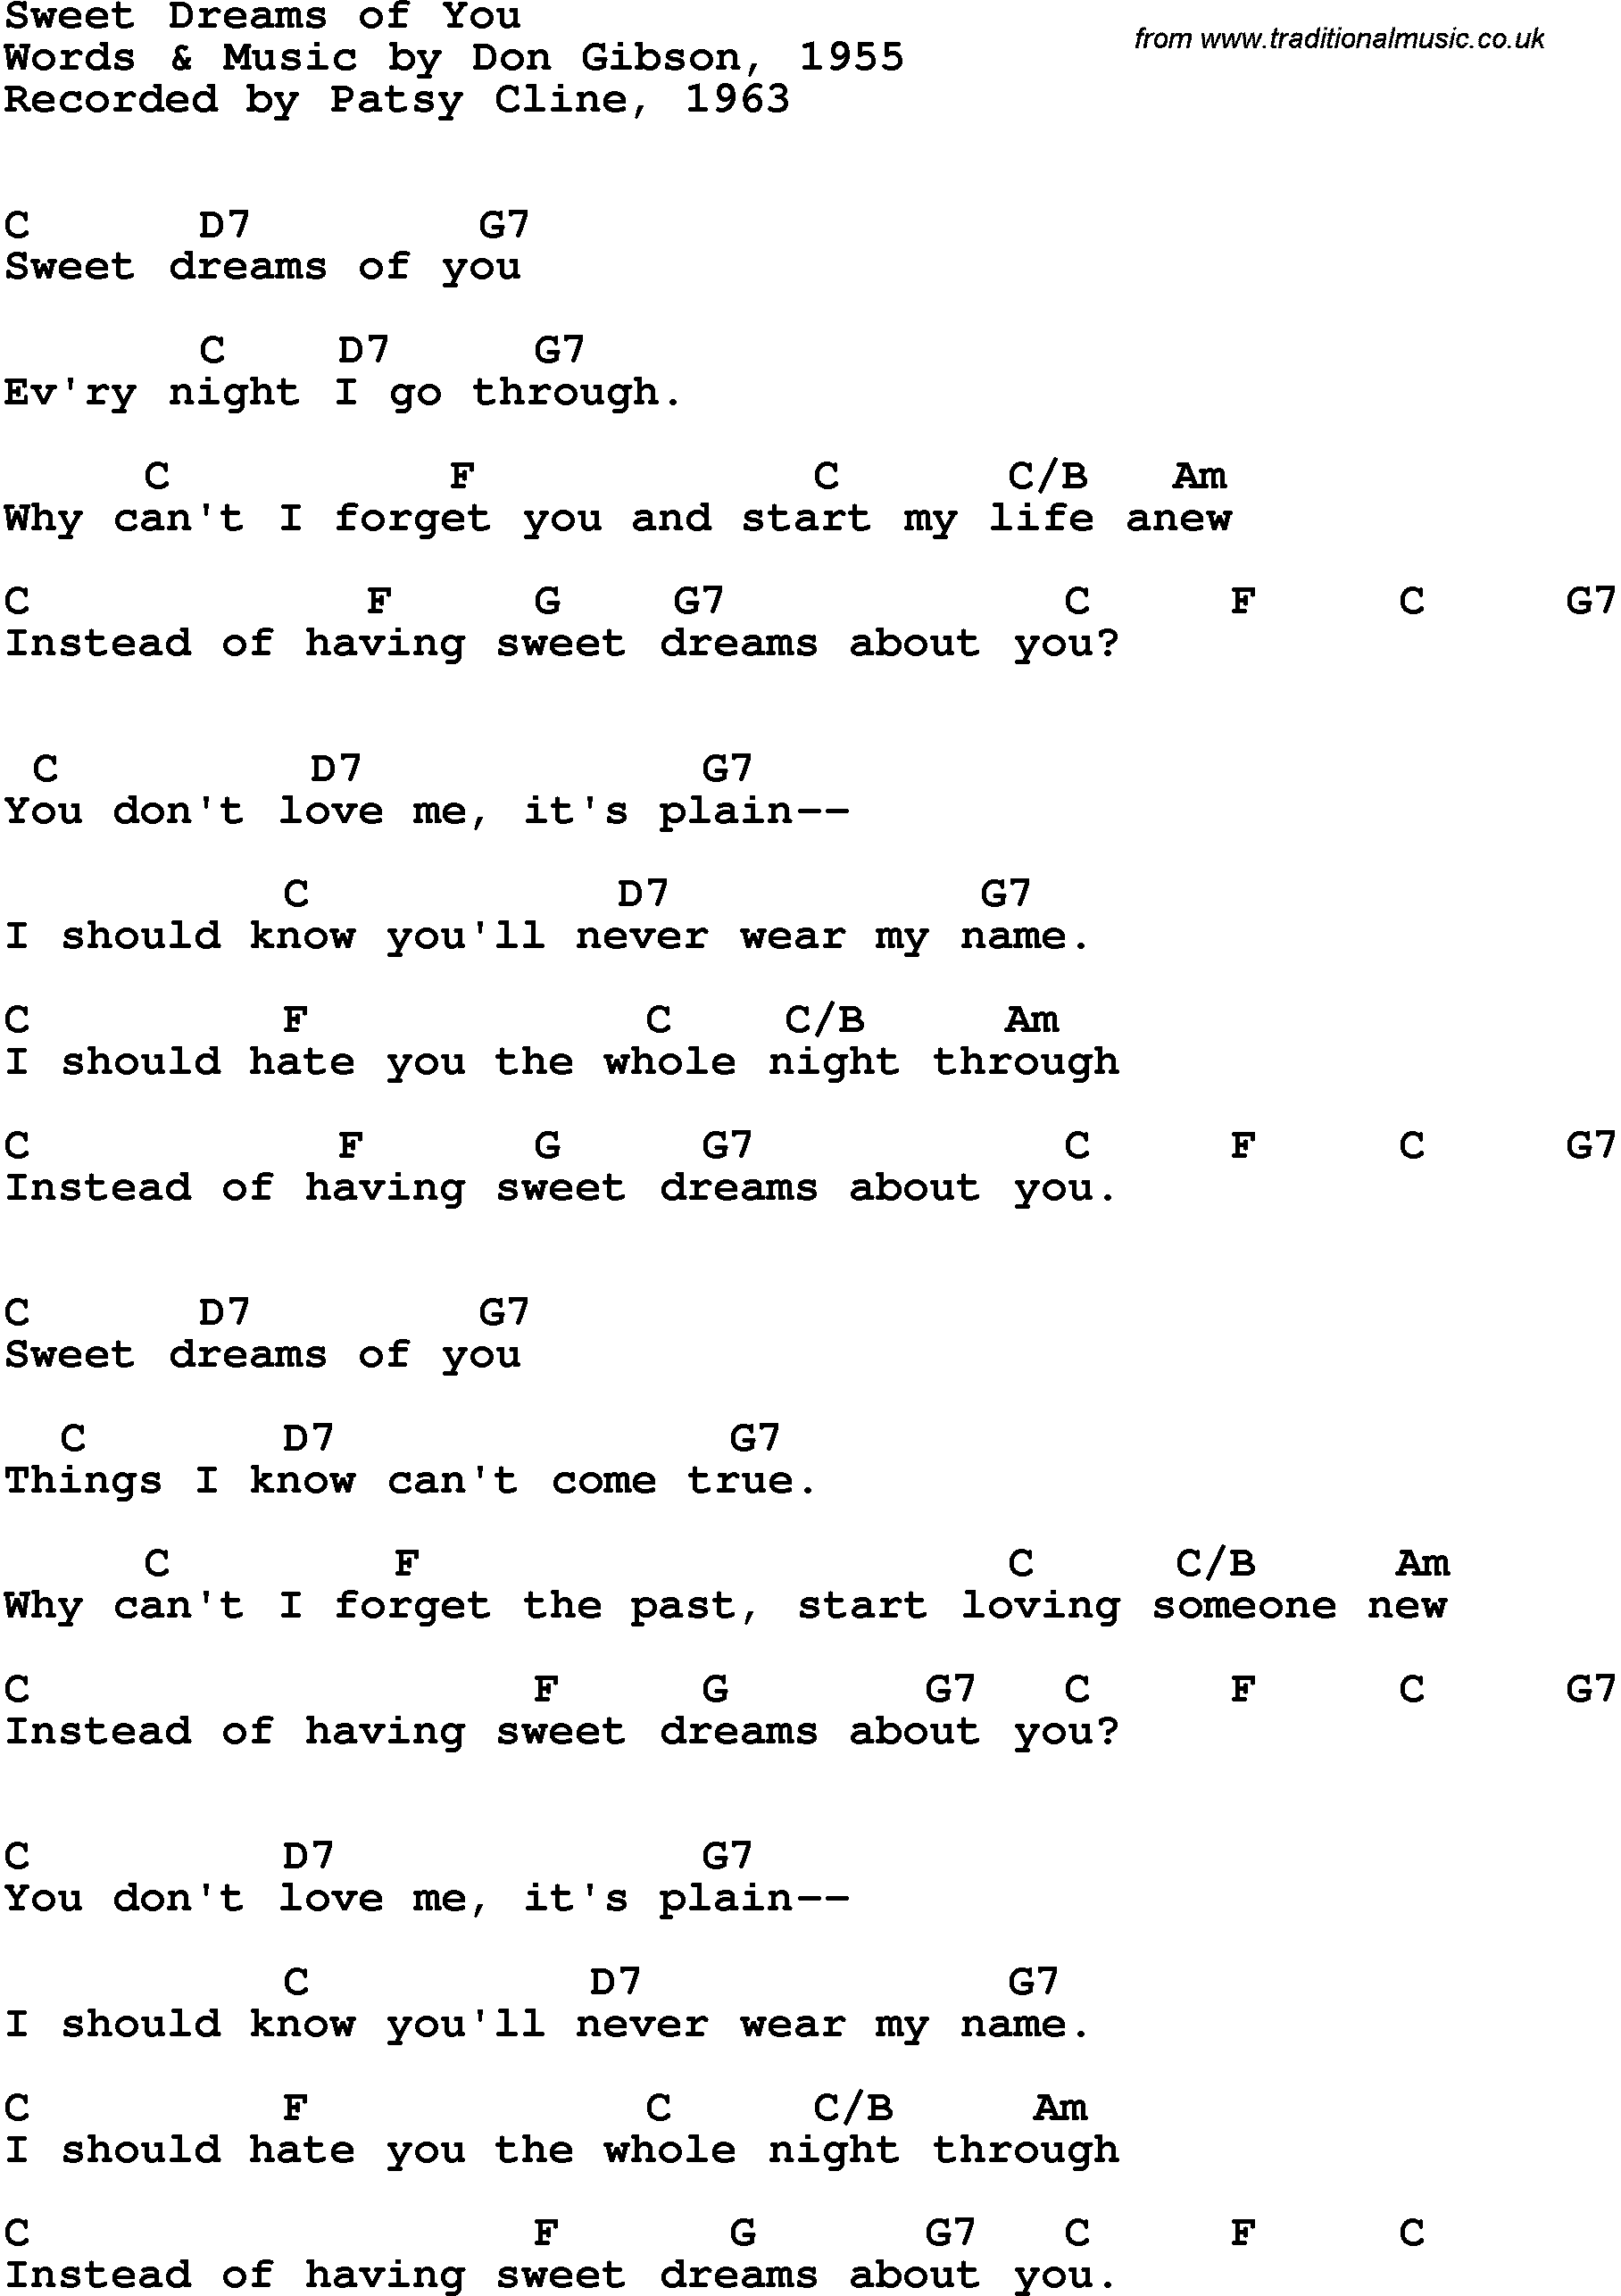 Song Lyrics with guitar chords for Sweet Dreams - Patsy Cline, 1963